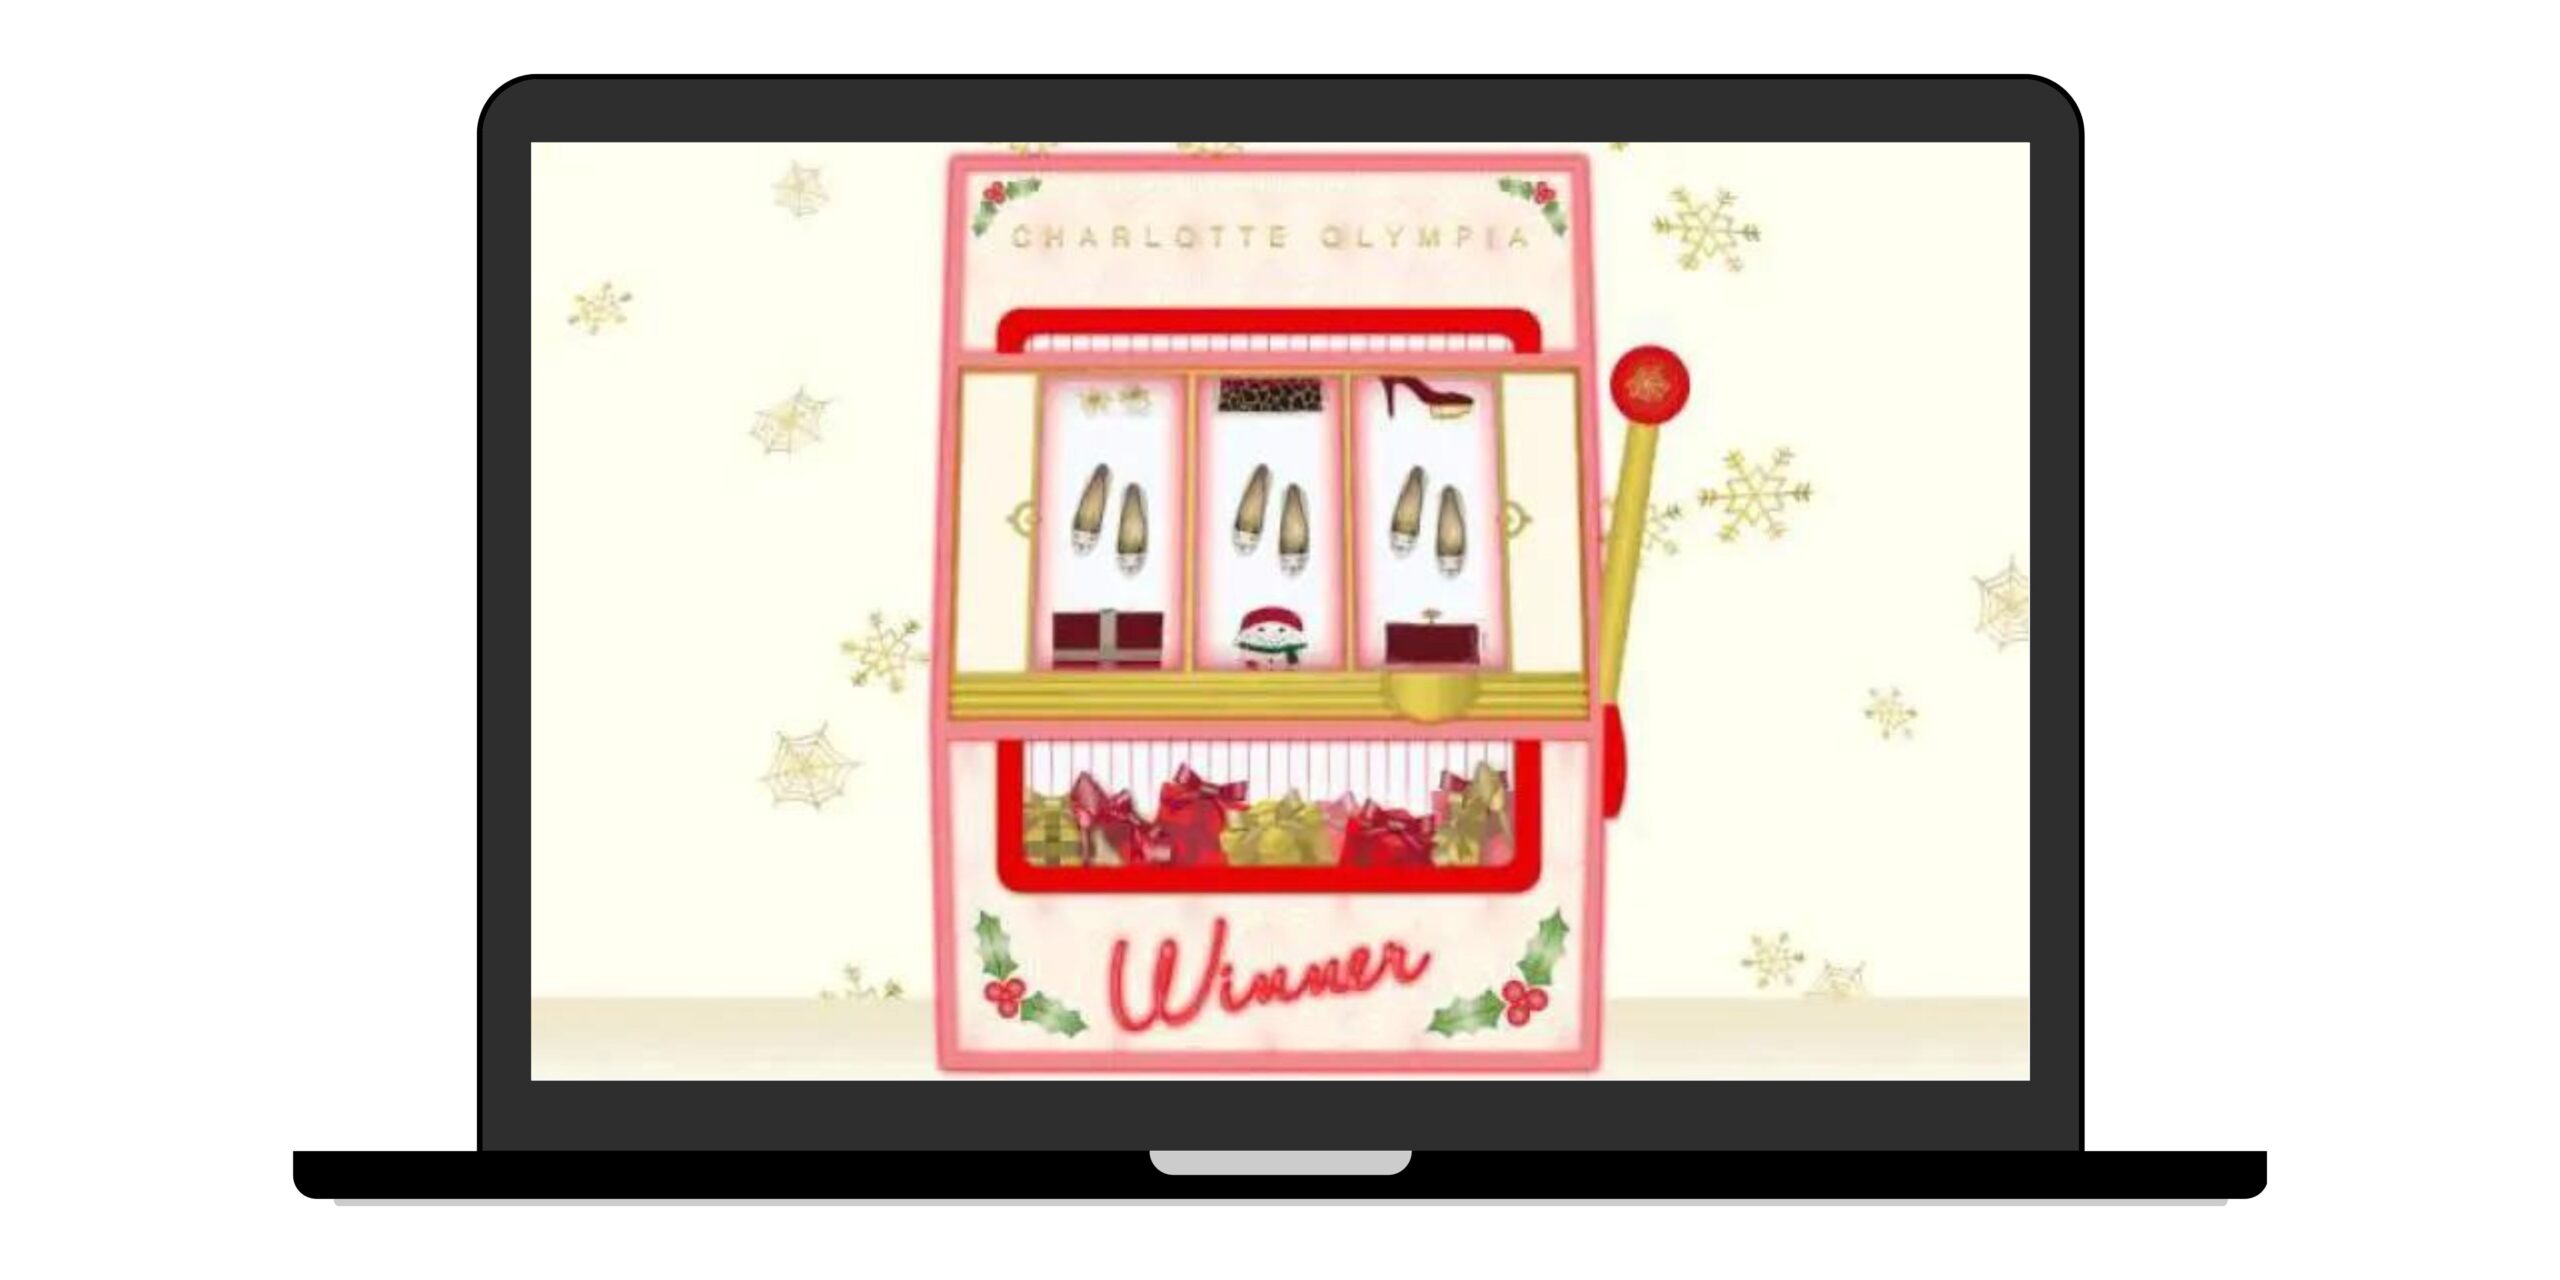 Charlotte Olympia Spin Win Slot Machine Christmas Gamification scaled